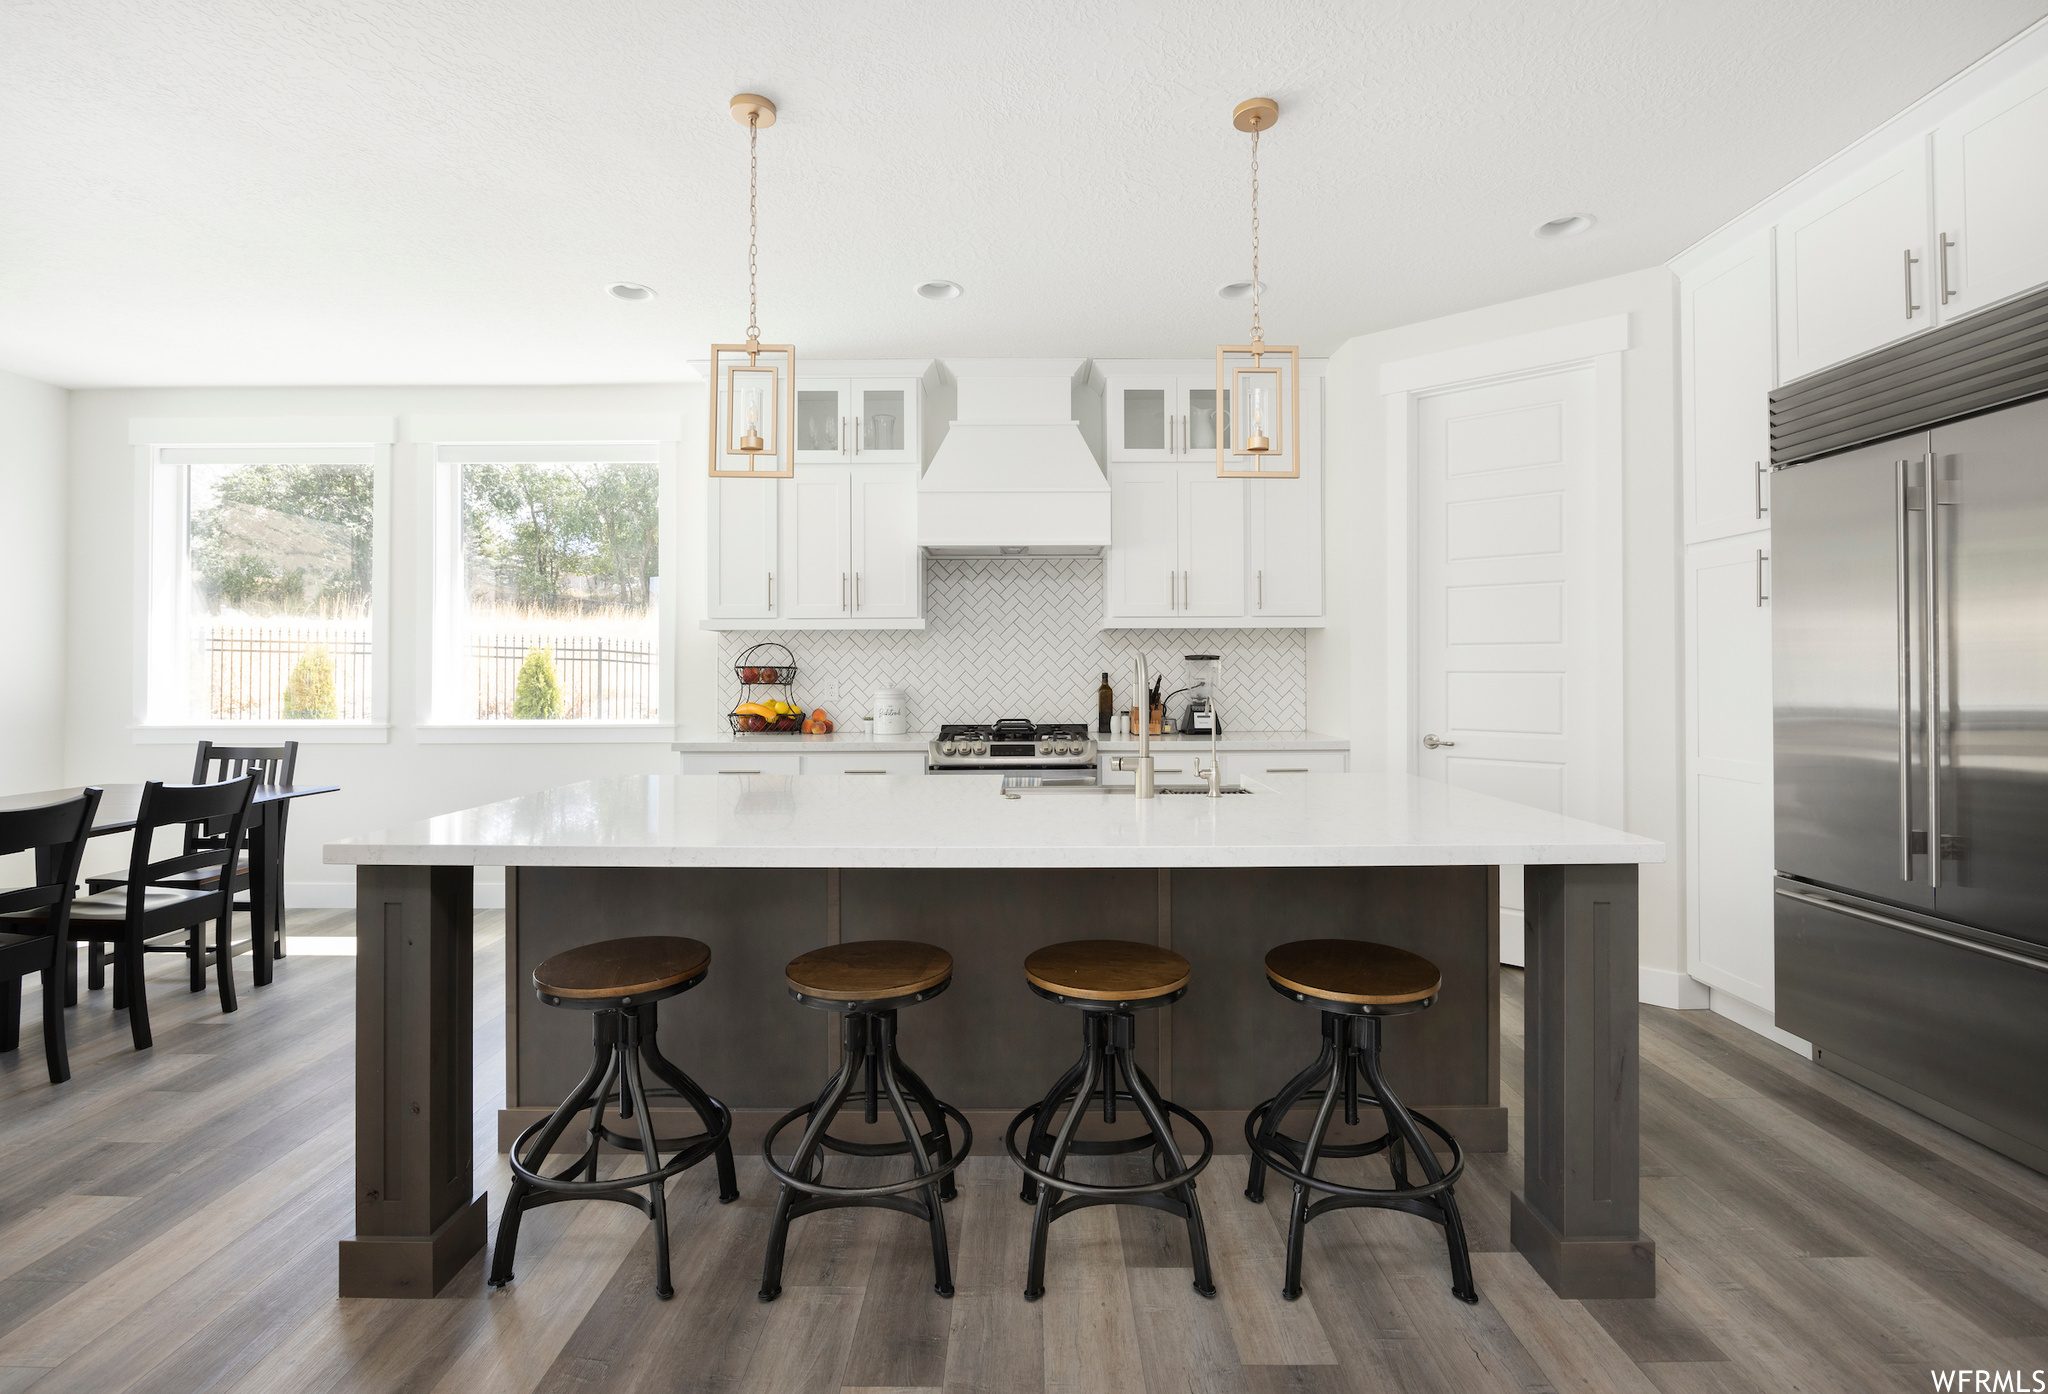 Kitchen with hanging light fixtures, custom range hood, a kitchen island with sink, and appliances with stainless steel finishes